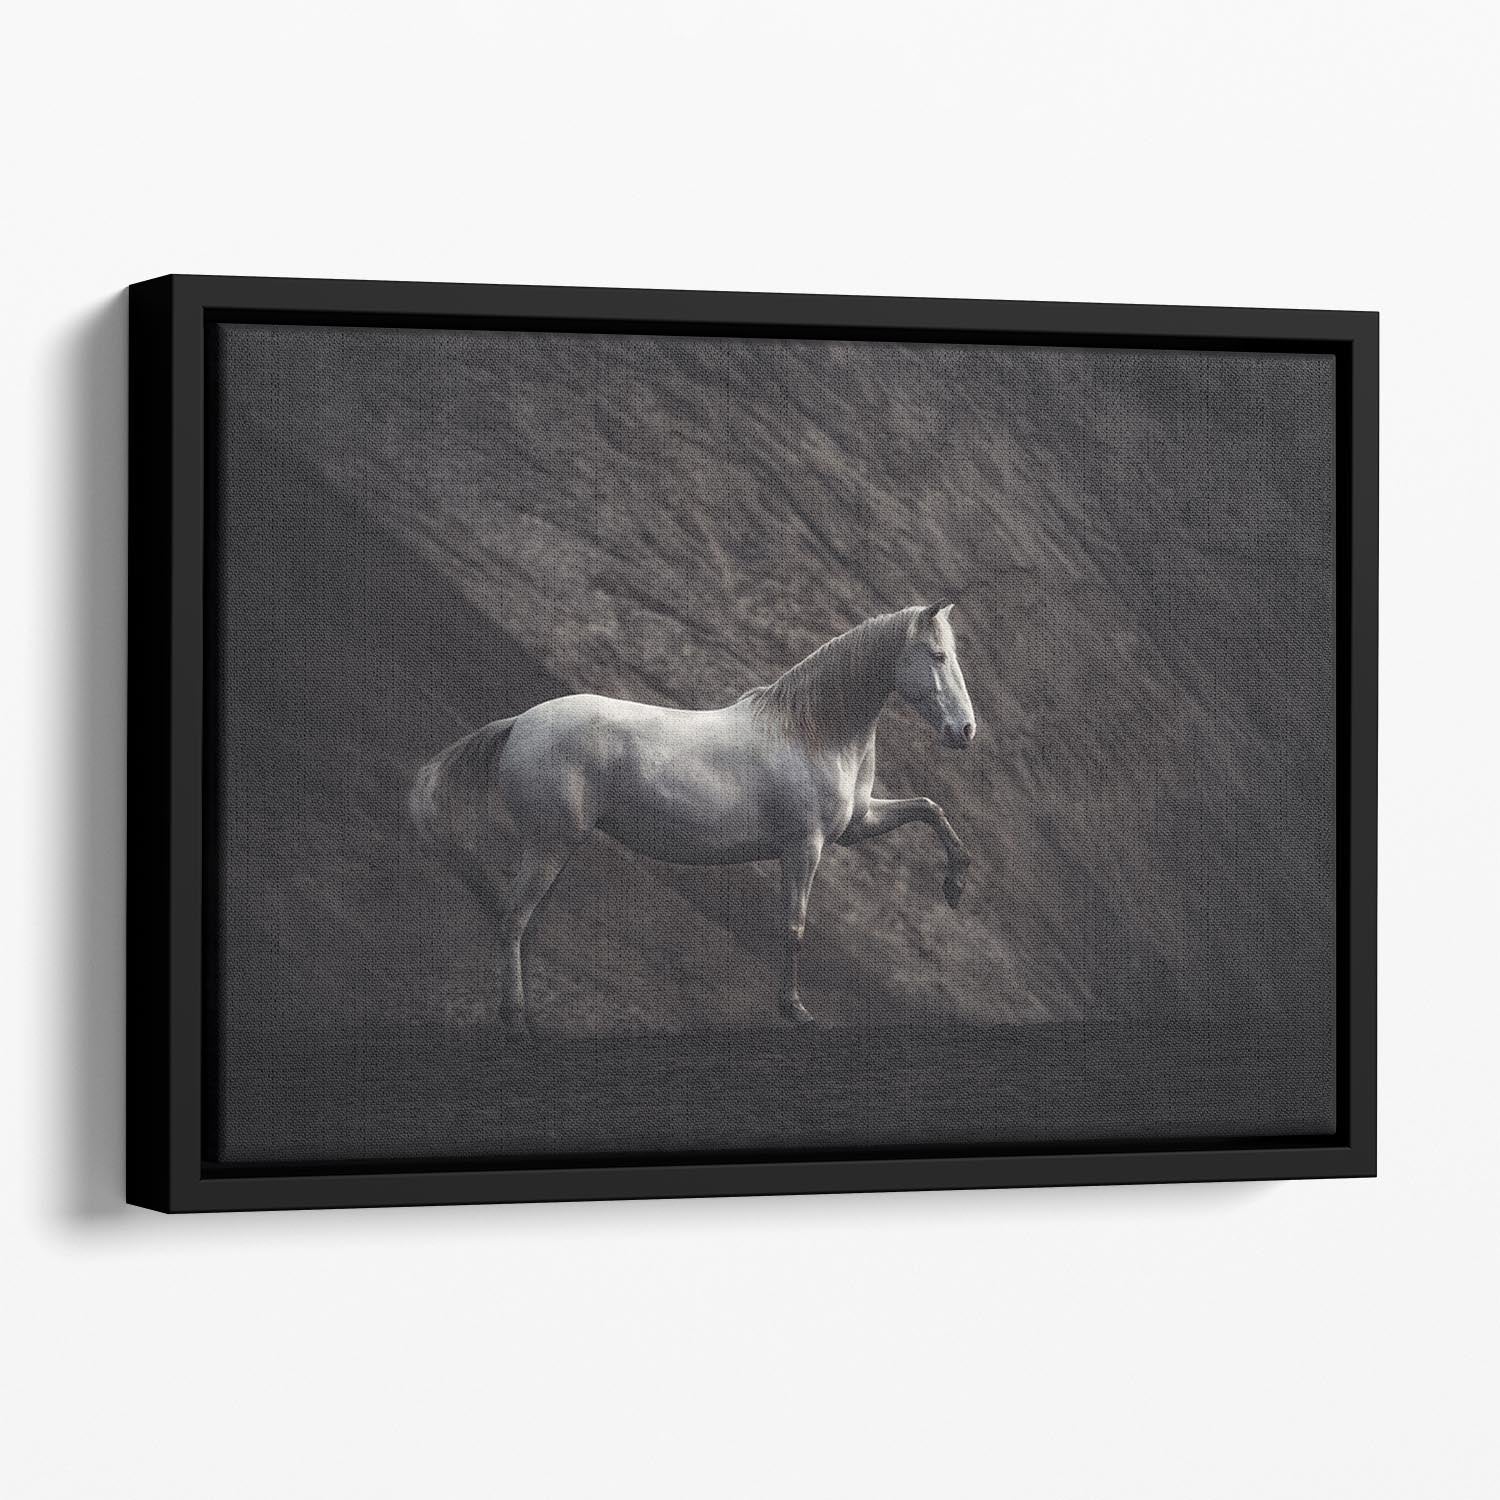 SOLITAIRE Floating Framed Canvas - 1x - 1